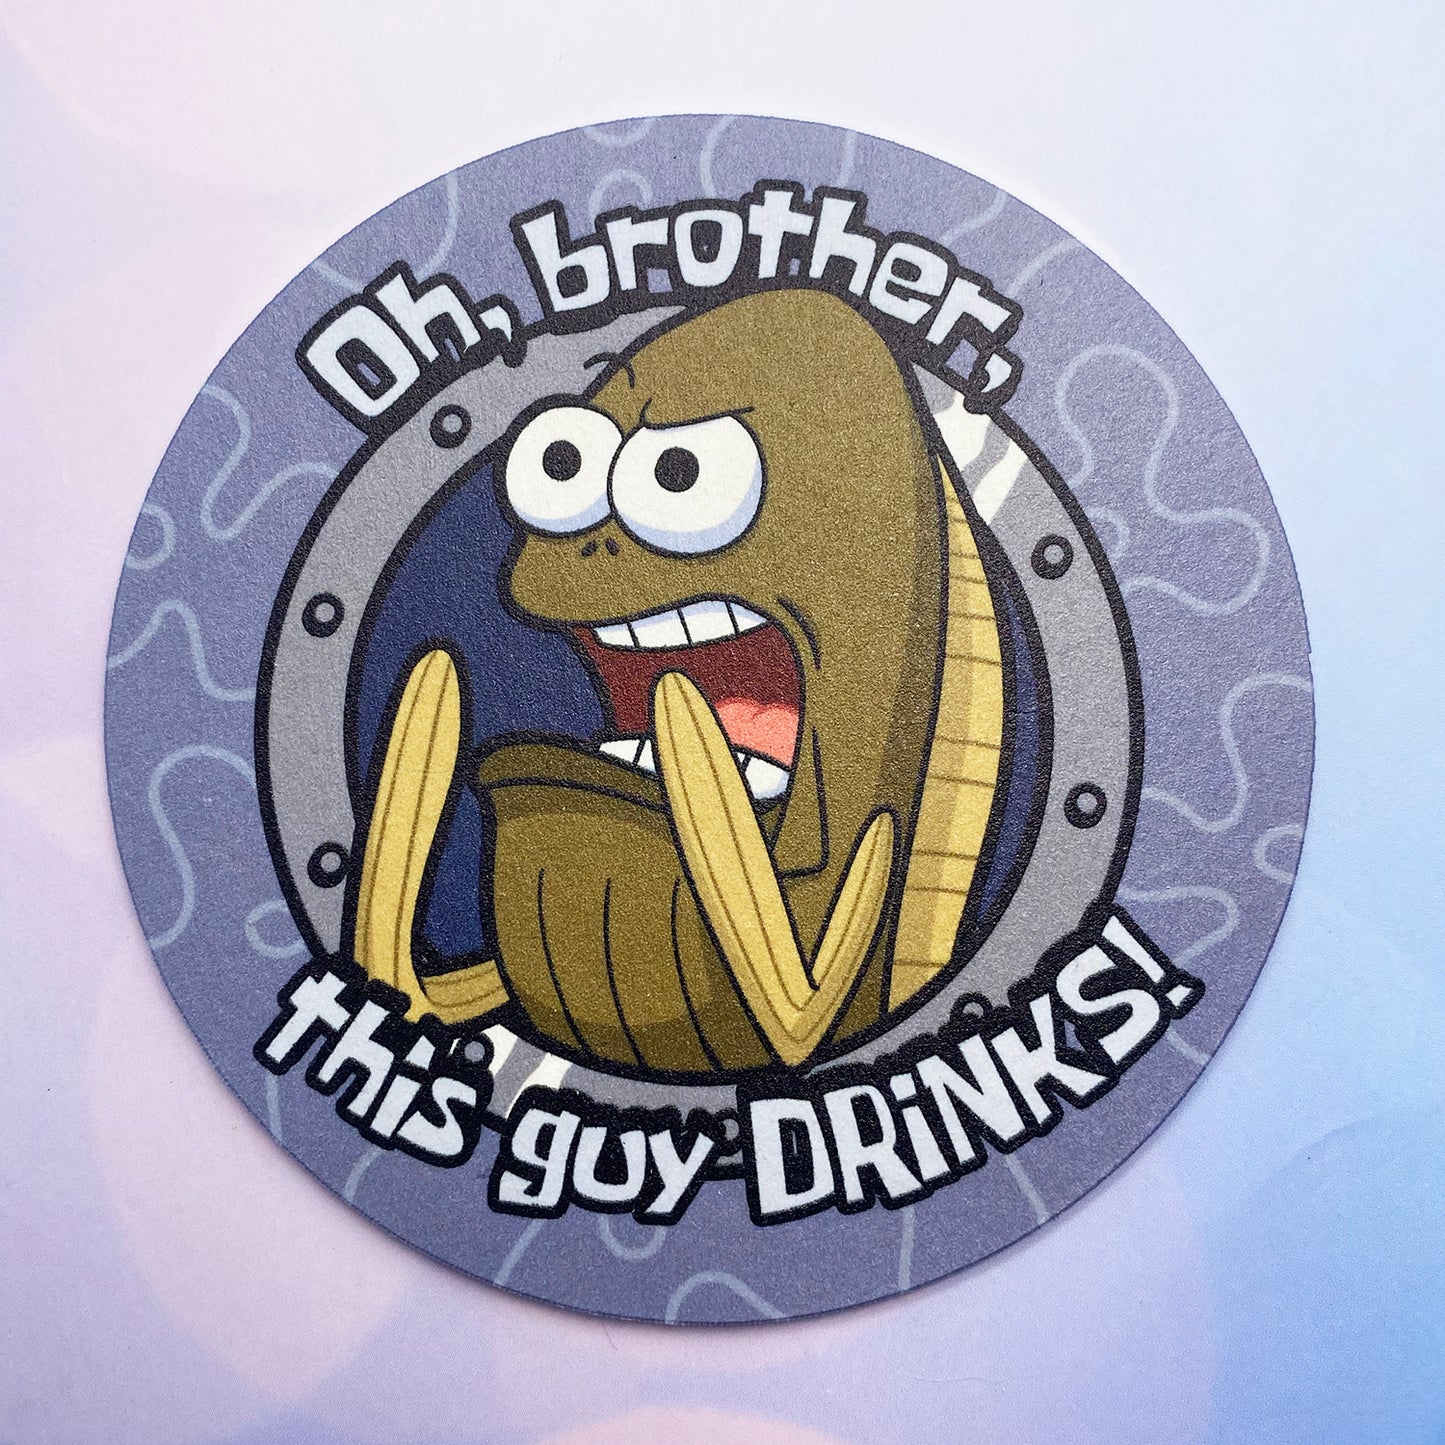 Oh Brother, This Guy Drinks! basic coaster SET OF 4